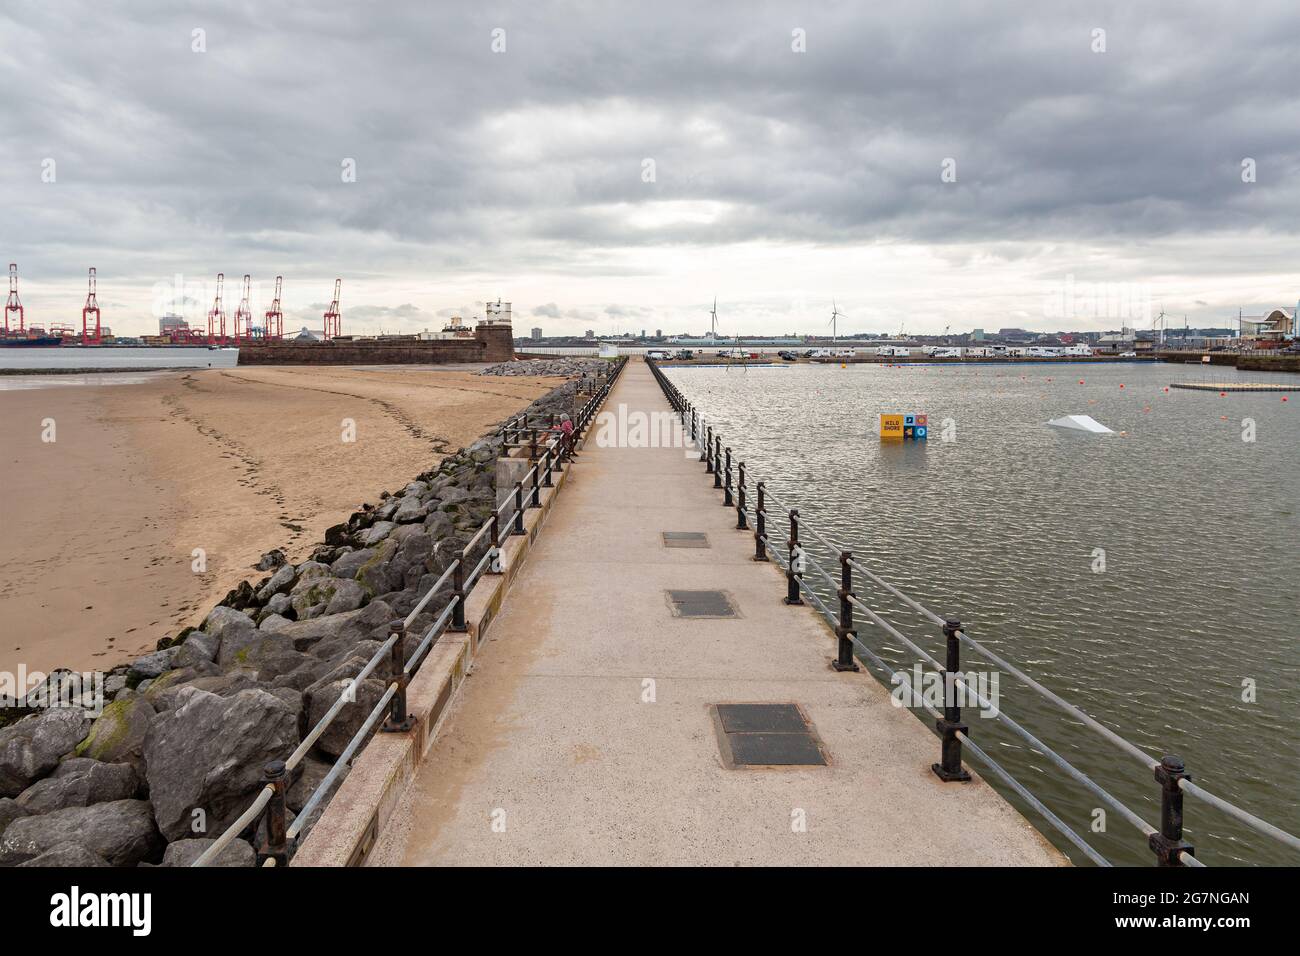 Marine Lake Promenade on the seafront, New Brighton, Wirral, UK. Fort Perch Rock in the background. Stock Photo